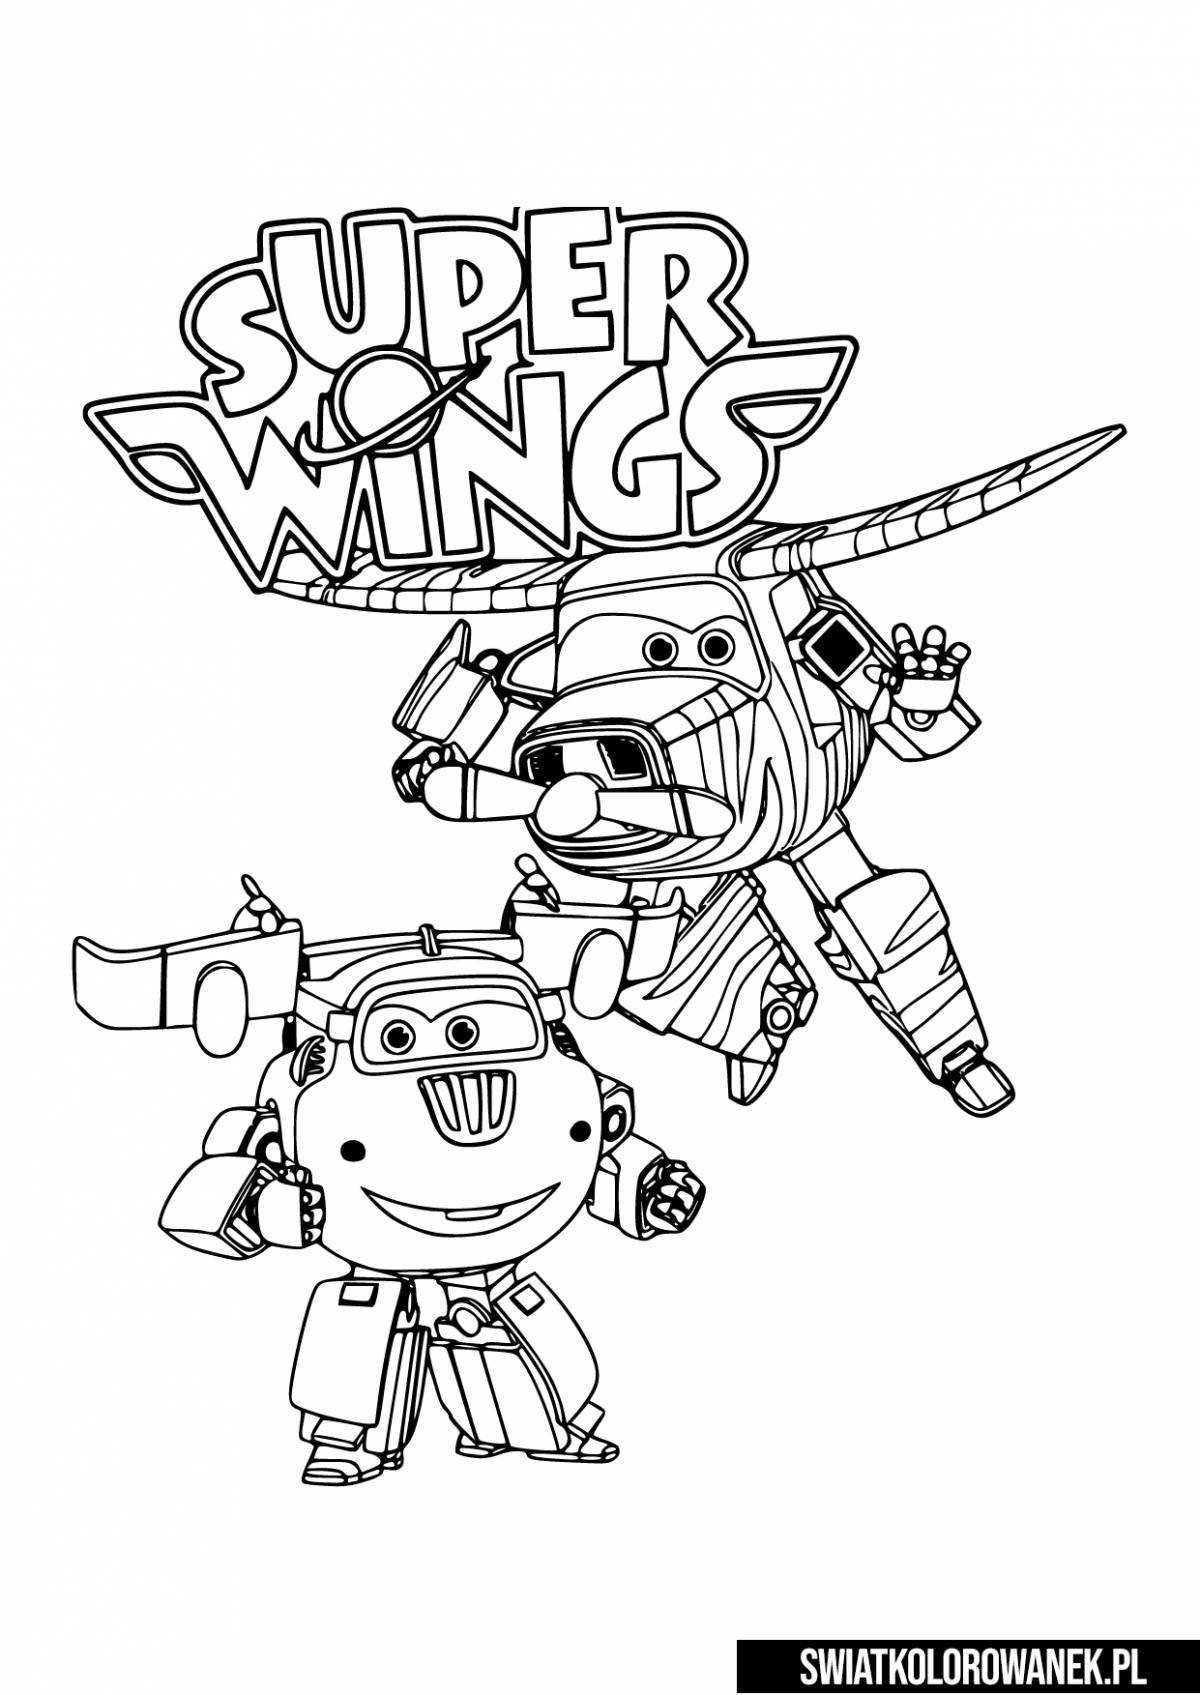 Awesome crystal super wings coloring page